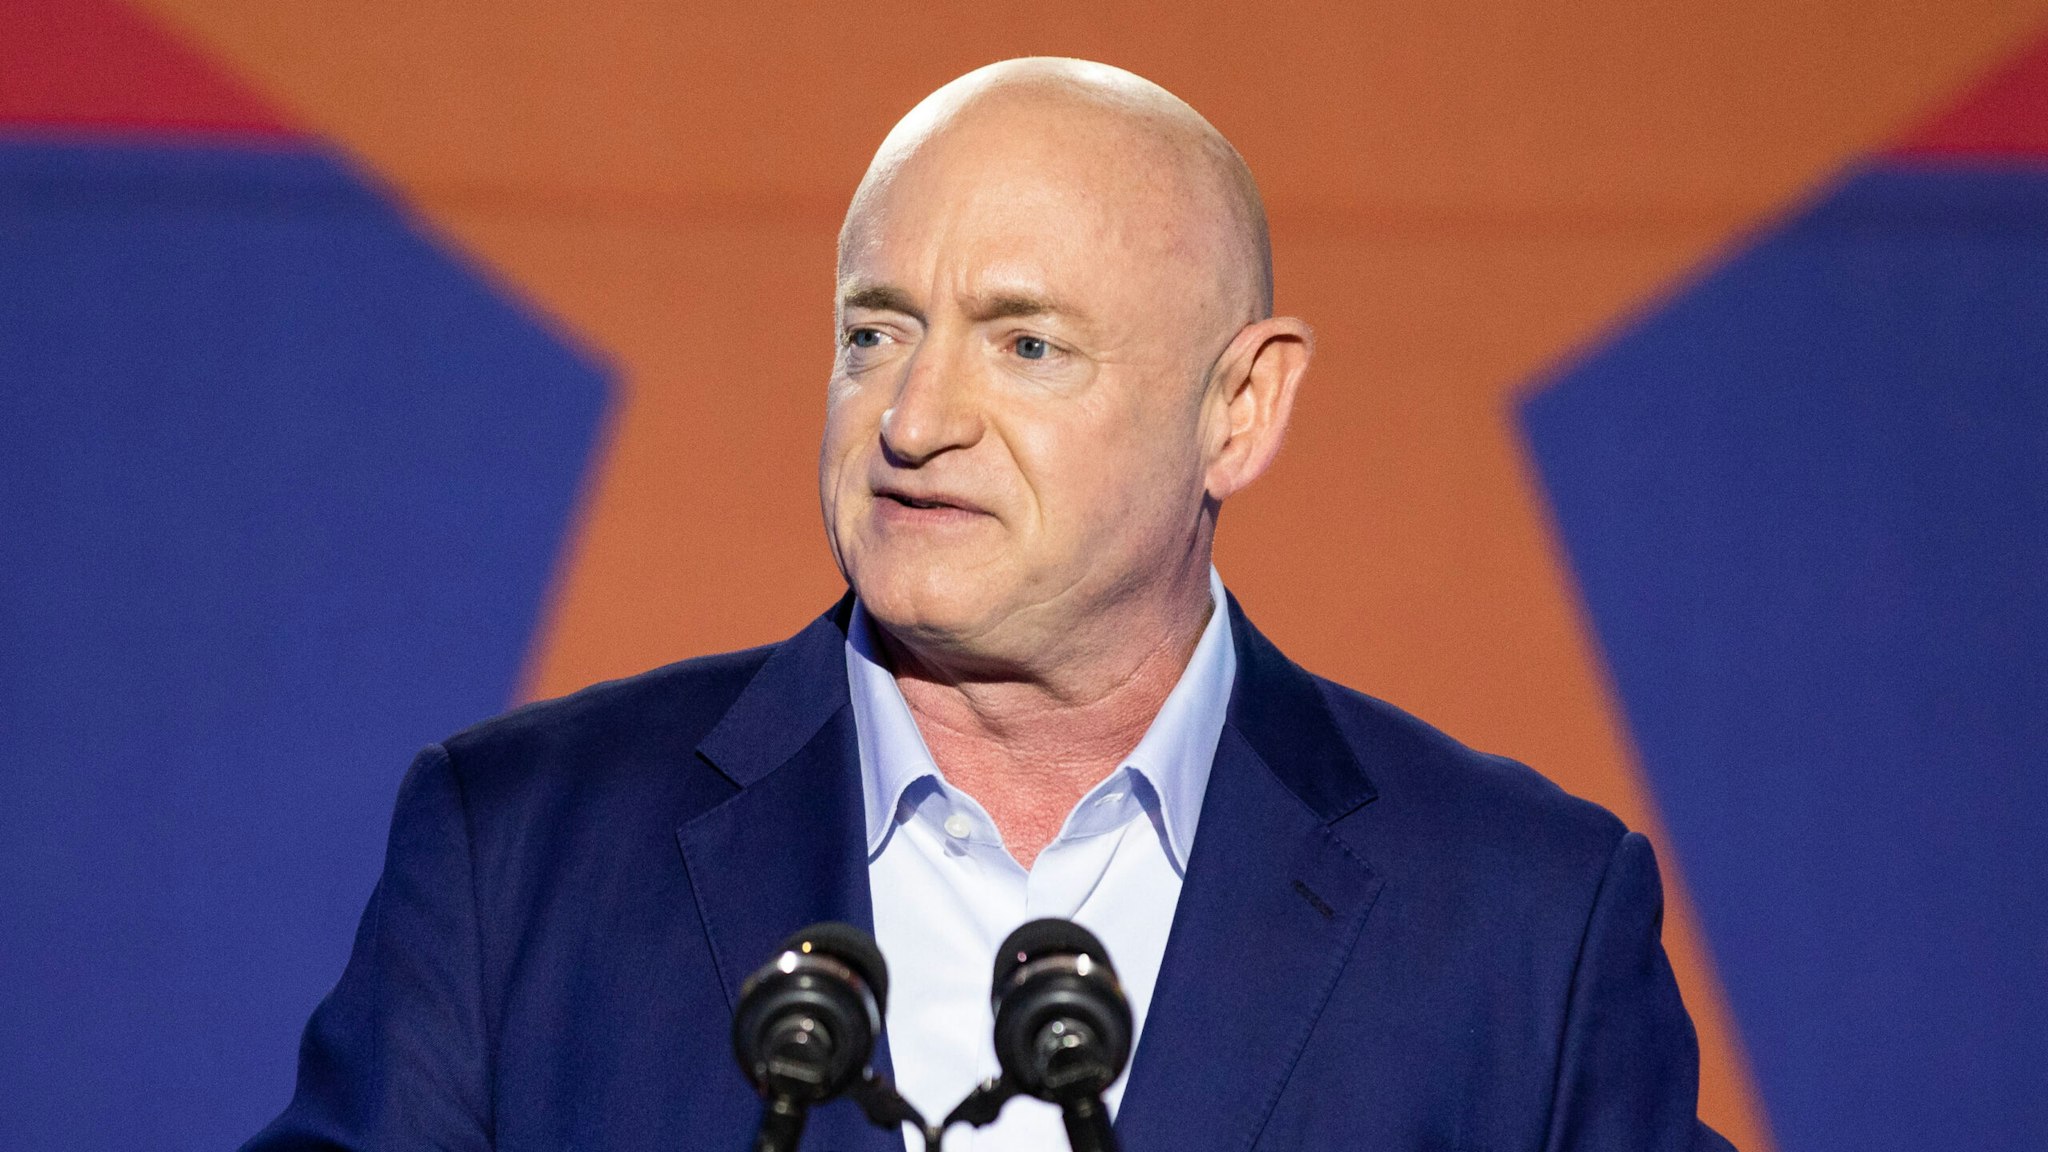 TUCSON, AZ - NOVEMBER 03: Democratic U.S. Senate candidate Mark Kelly speaks to supporters during the Election Night event at Hotel Congress on November 3, 2020 in Tucson, Arizona. Kelly is running against Republican U.S. Senate candidate Sen. Martha McSally (R-AZ) for Arizona's Senate seat and is hoping to join fellow Democrat Sen. Kyrsten Sinema in the historically Republican state.